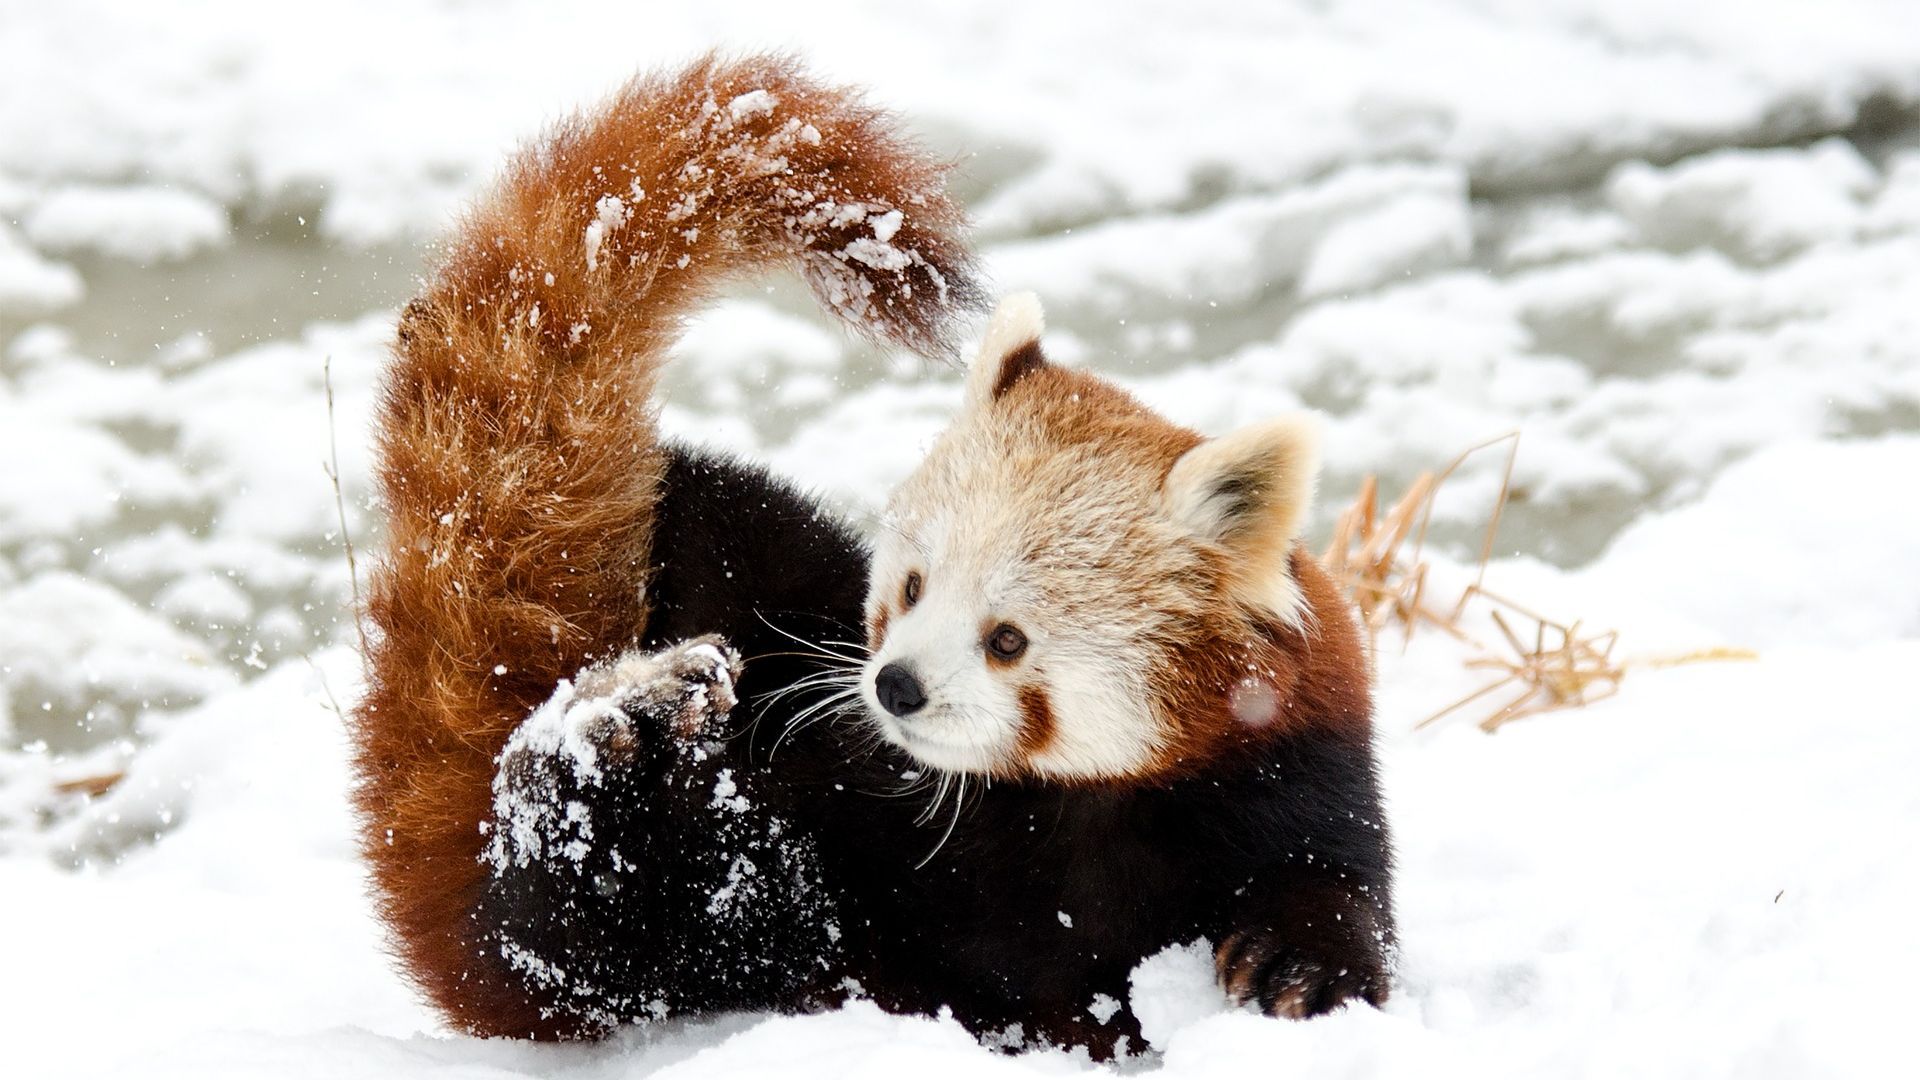 Chinese Little Red Panda Playing in Snow. Cute animals, Red panda, Baby animals